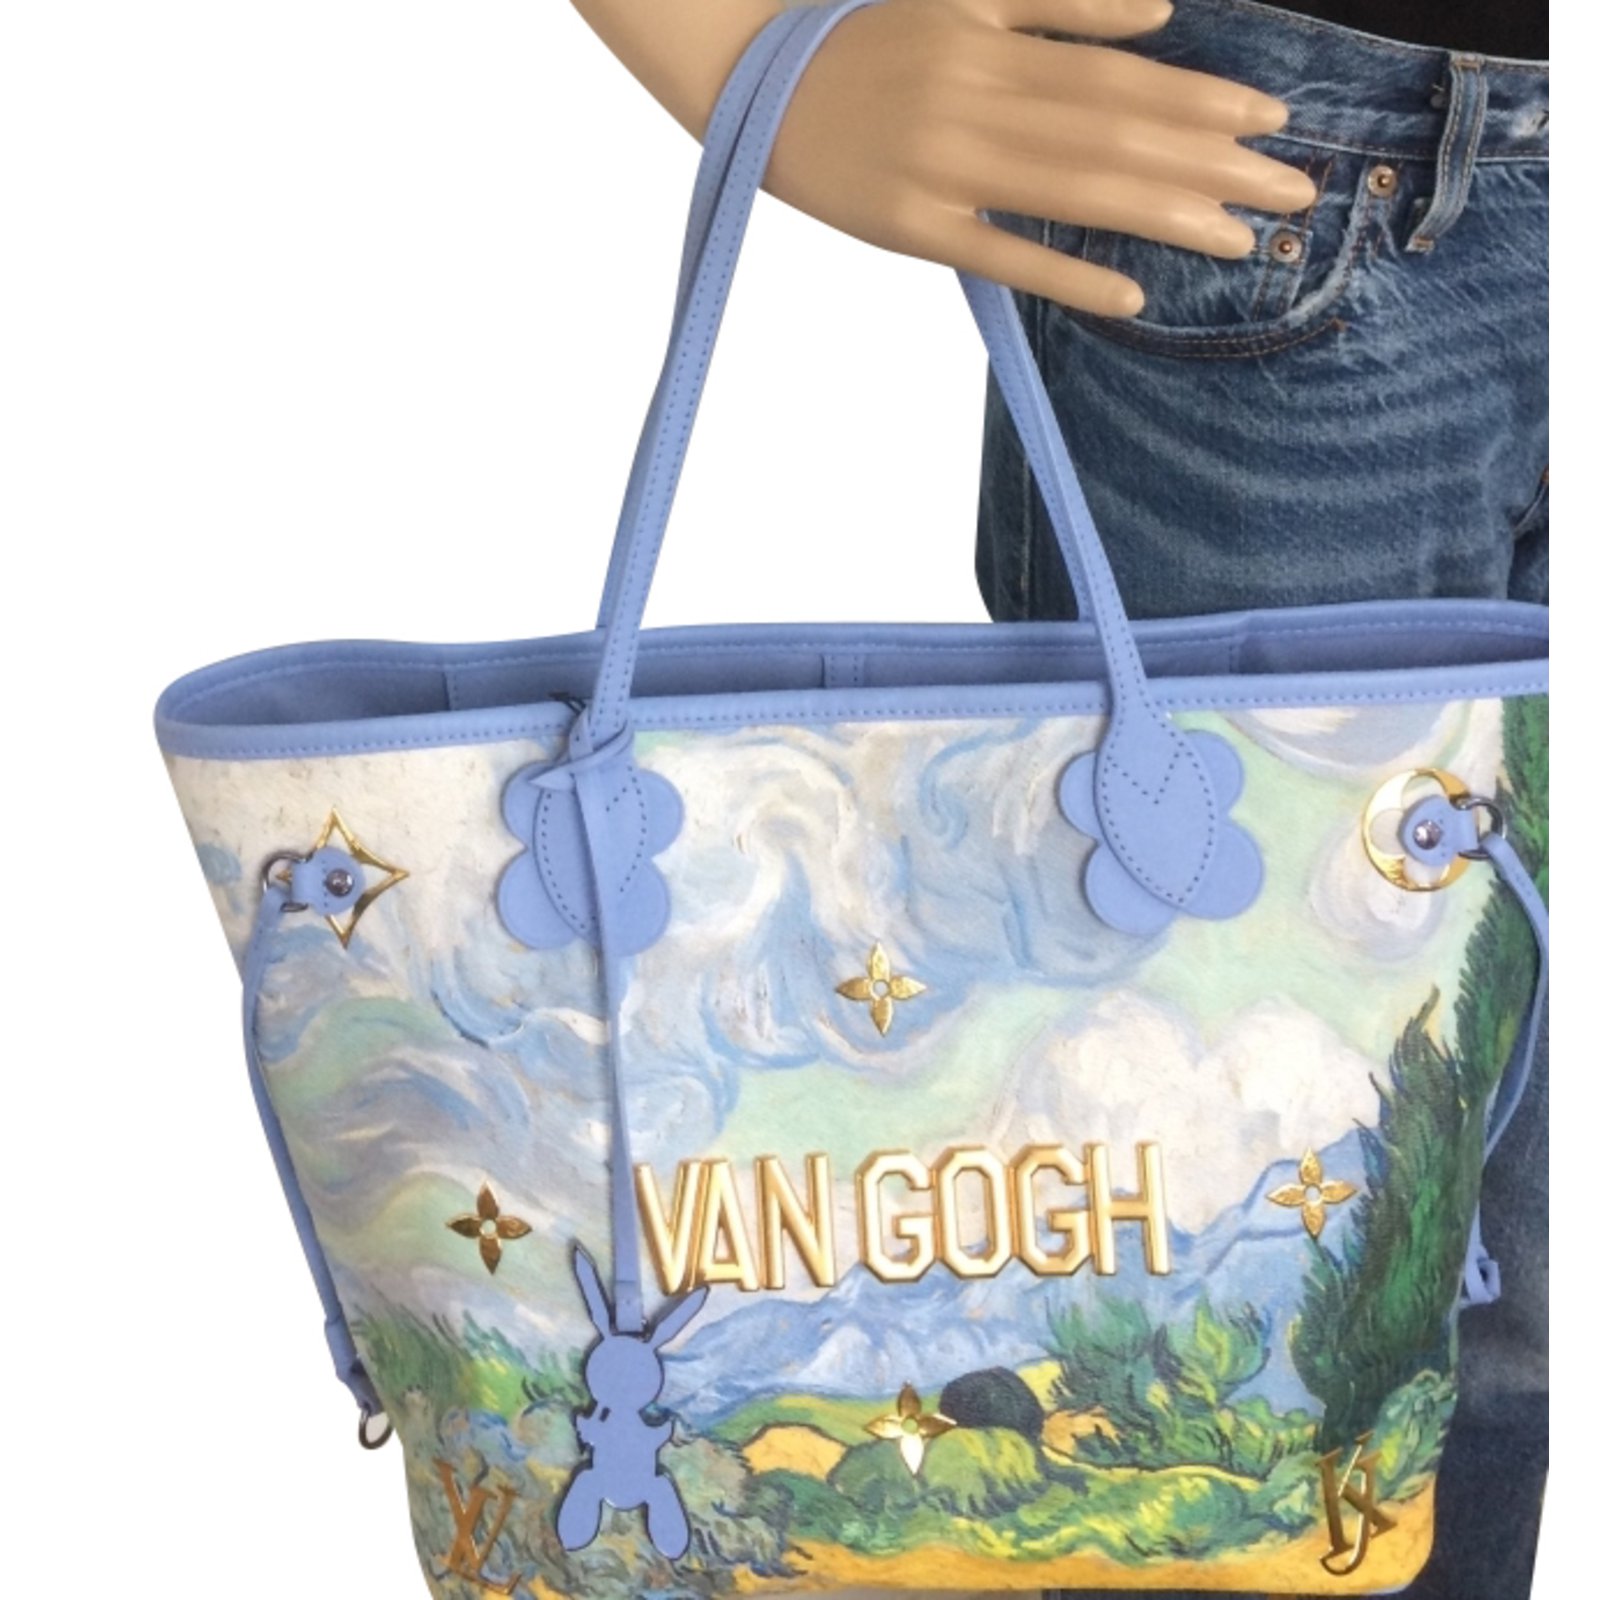 Louis Vuitton x Jeff Koons Van Gogh Neverfull MM Tote with